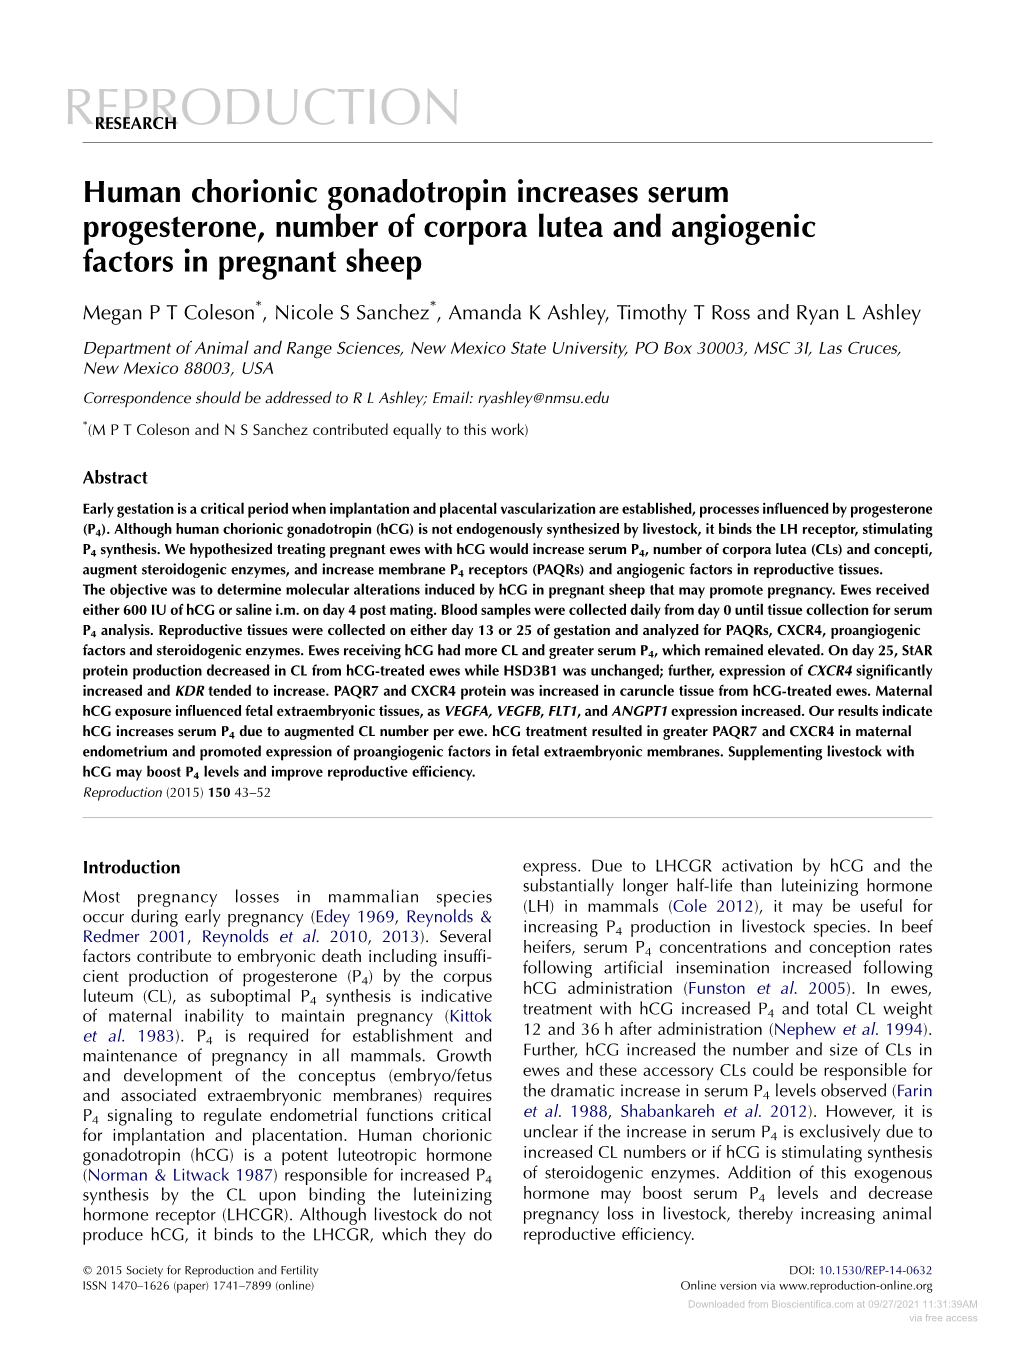 Human Chorionic Gonadotropin Increases Serum Progesterone, Number of Corpora Lutea and Angiogenic Factors in Pregnant Sheep